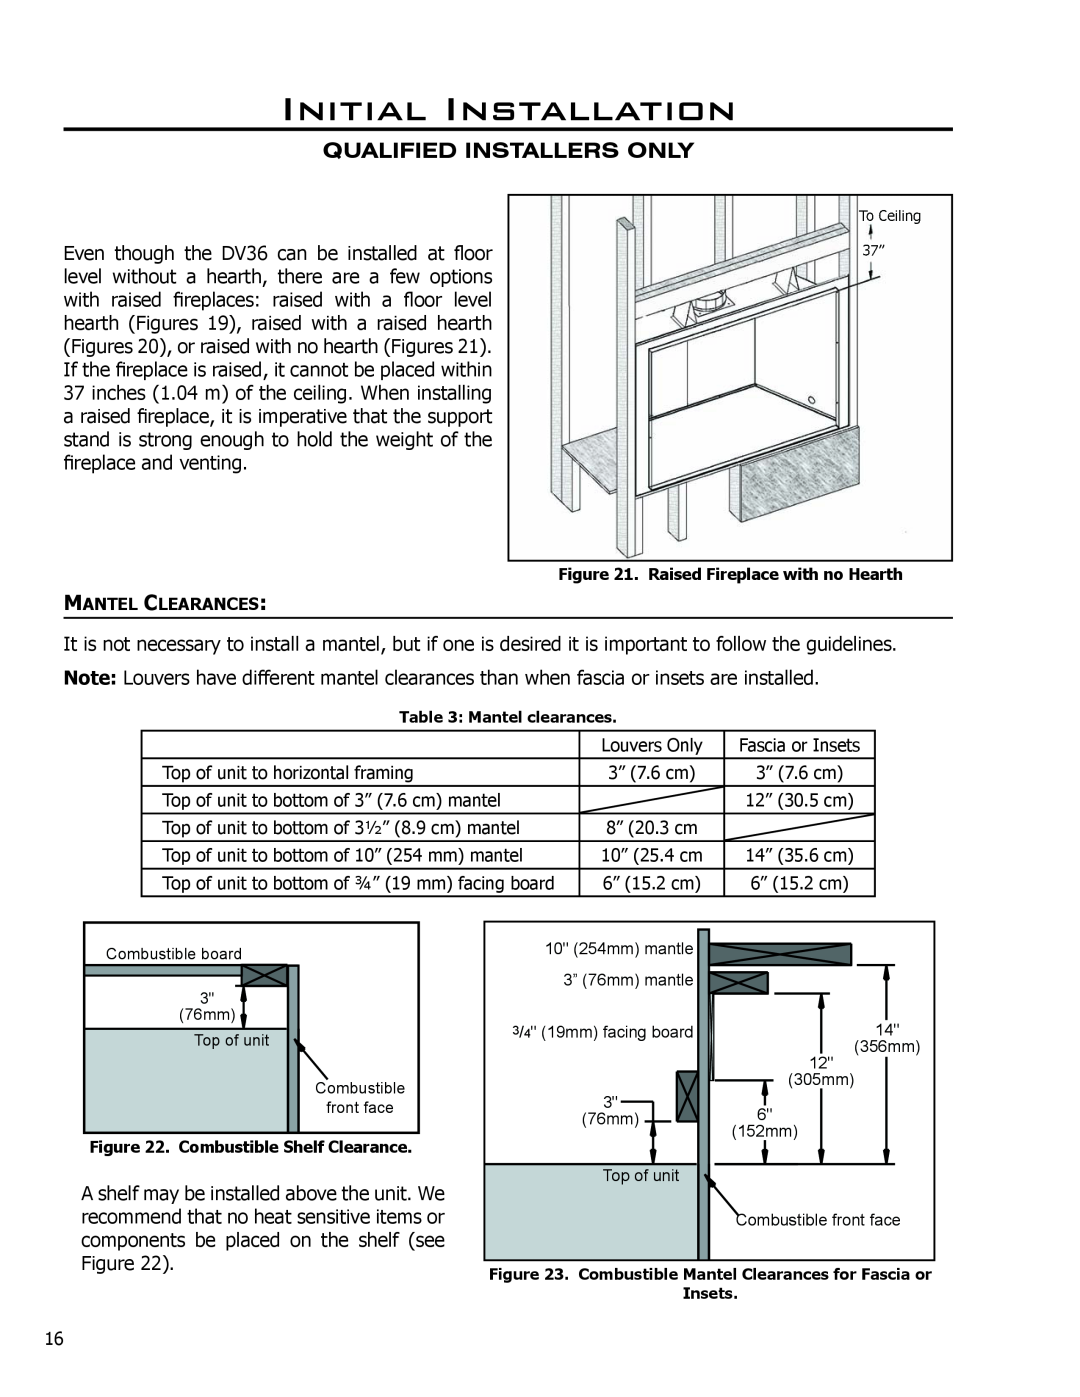 Enviro C-11275 owner manual Initial Installation, Qualified Installers Only, Mantel Clearances 